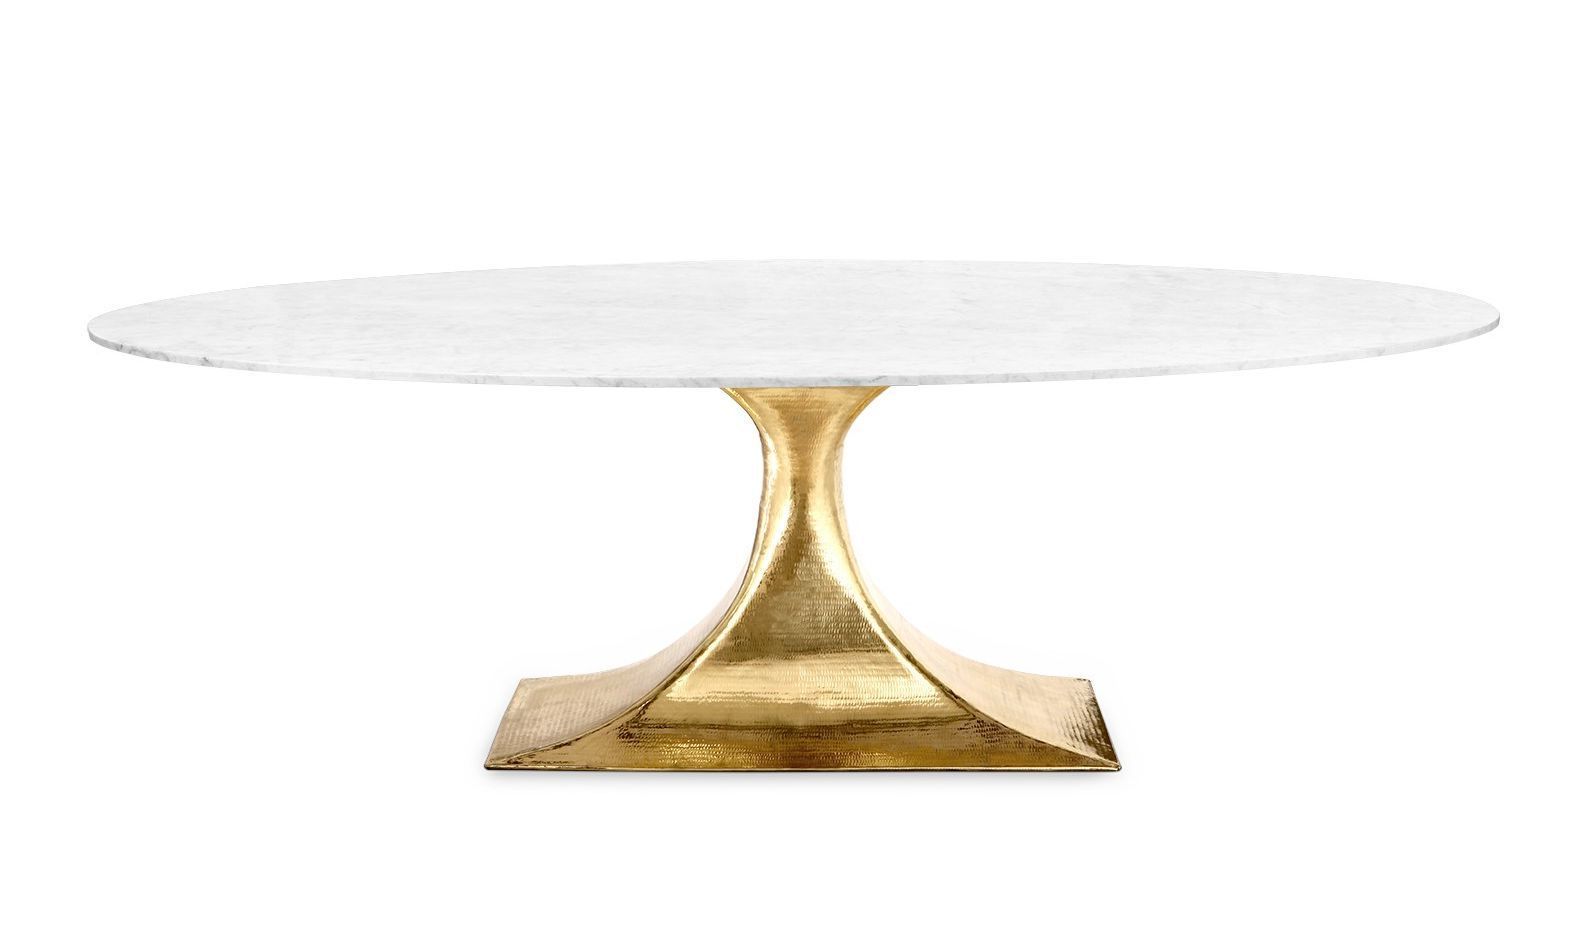 Dining Tables In Seared Oak With Brass Detail With Fashionable Oval Stone Top Dining Table With Hammered Metal Base (View 27 of 30)